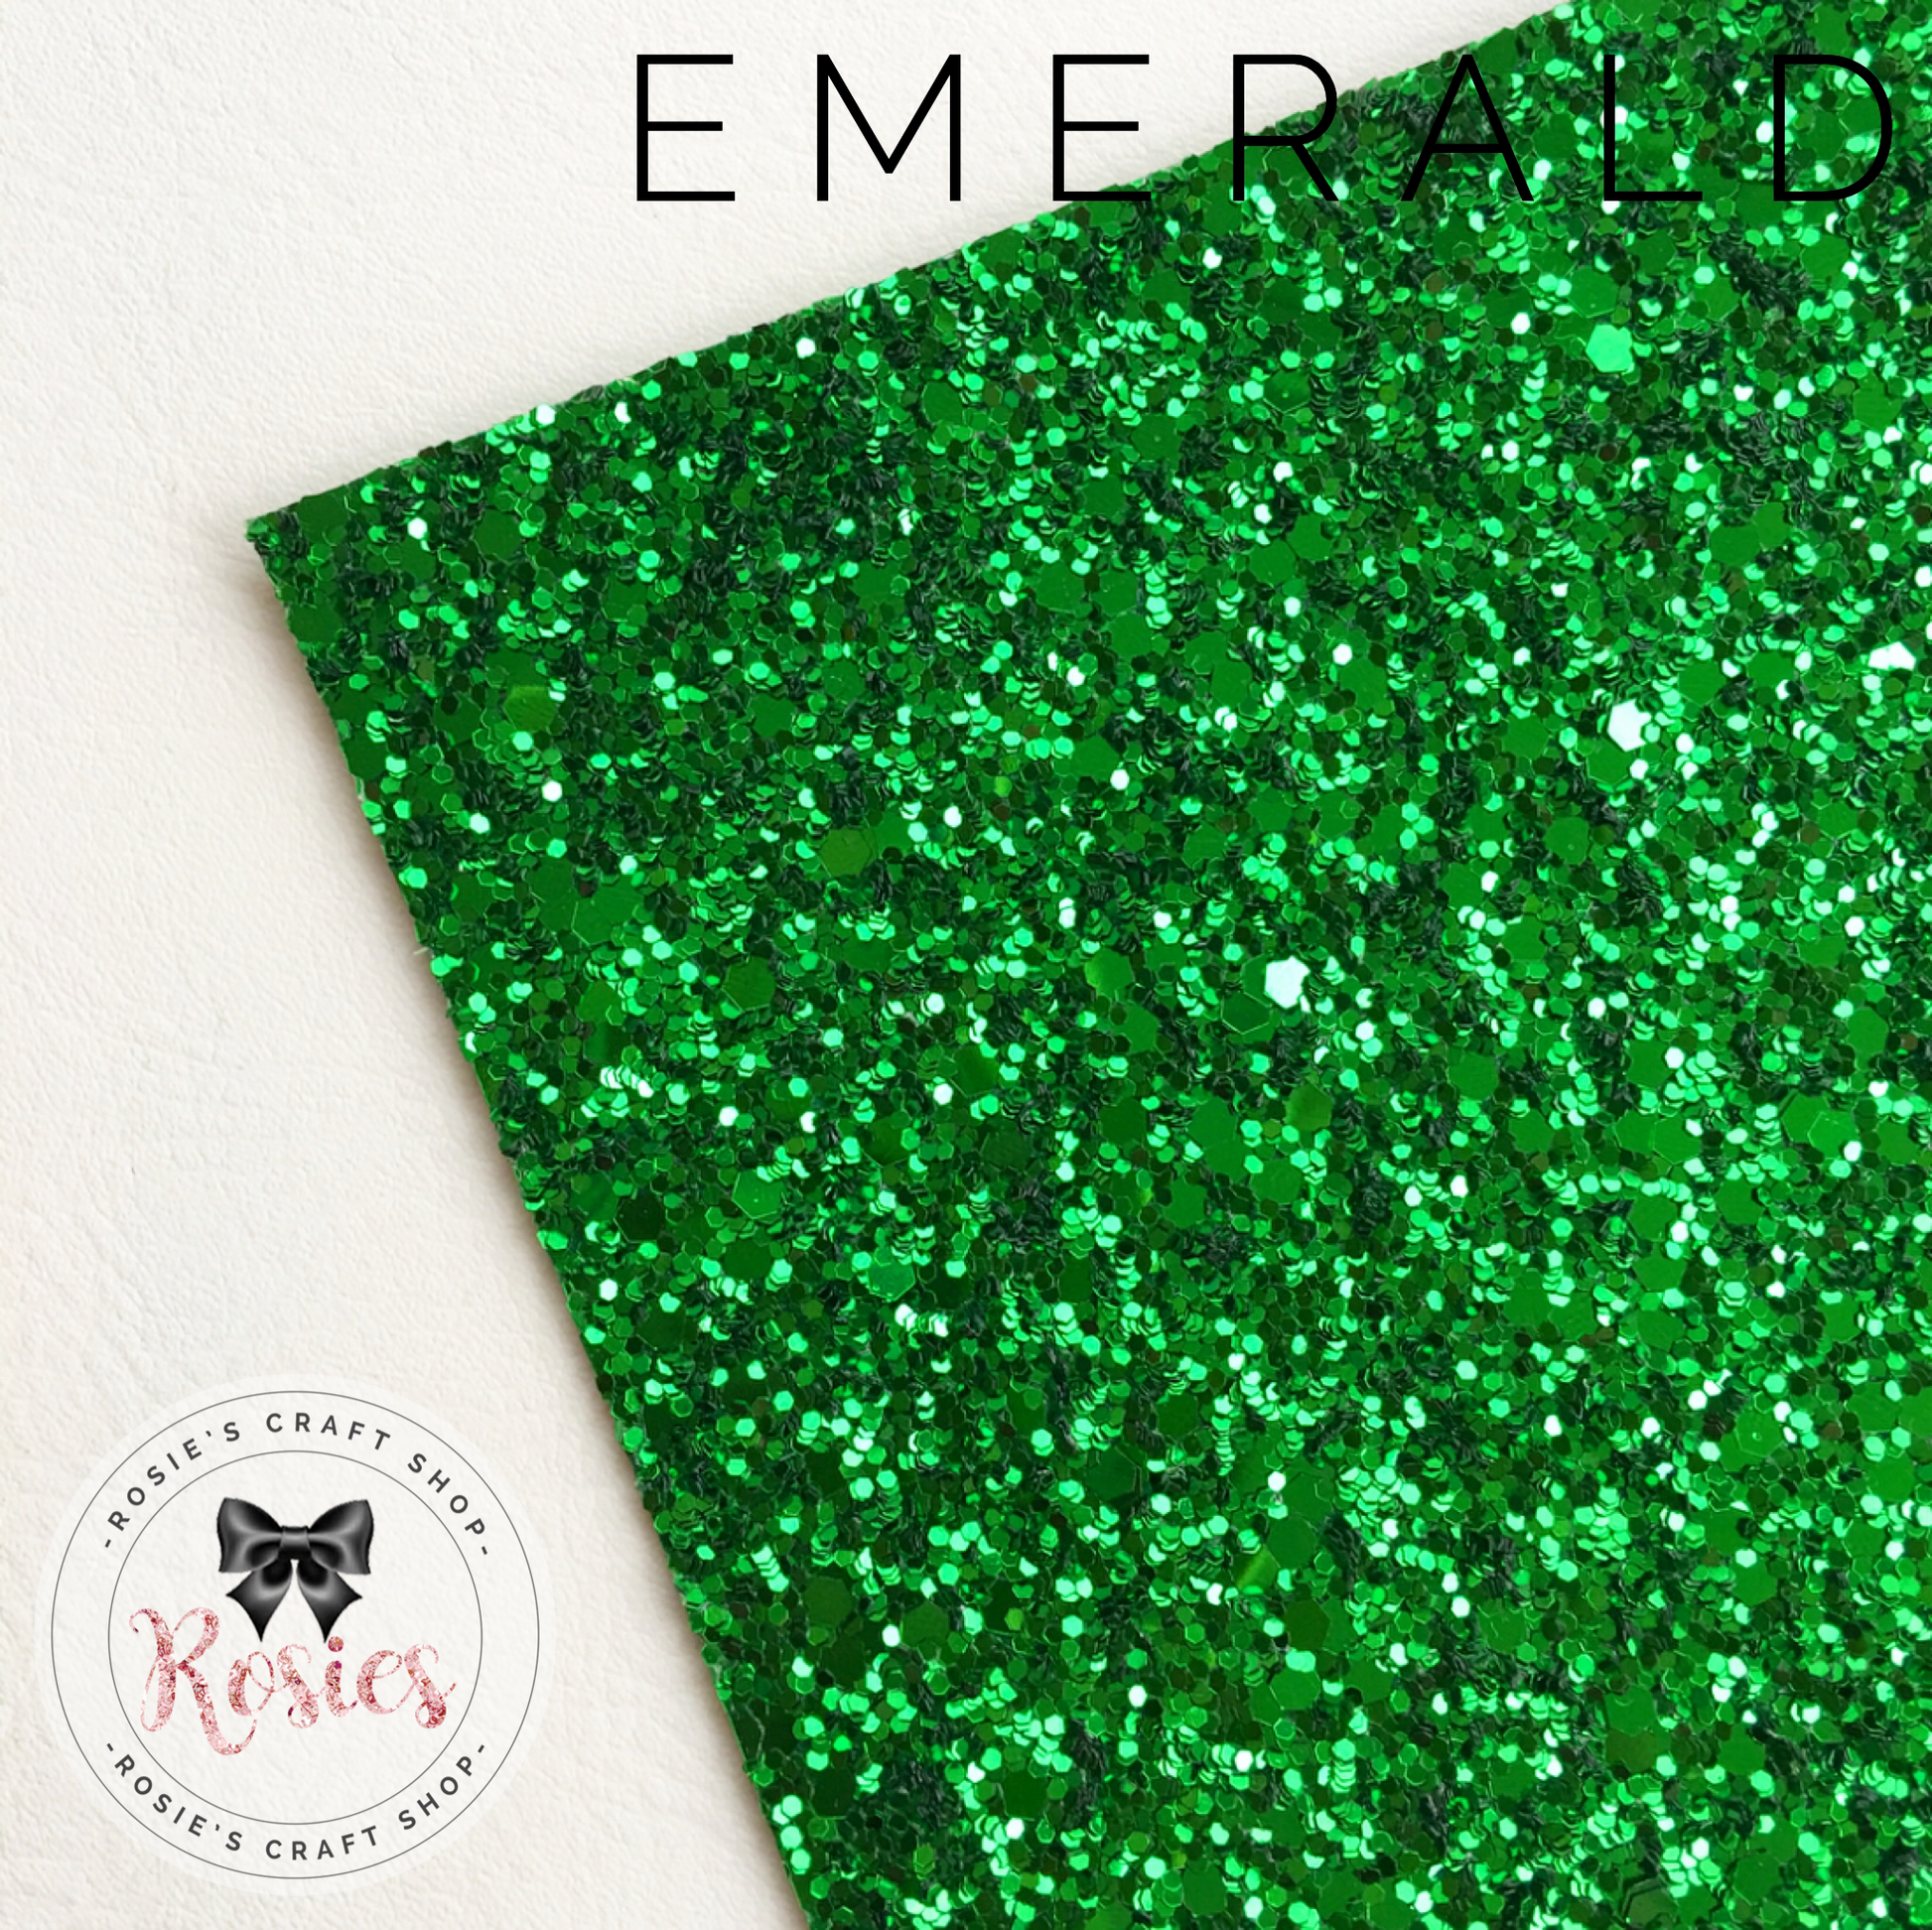 Emerald Green Luxury Chunky Glitter Fabric - Classic Collection - Rosie's Craft Shop Ltd